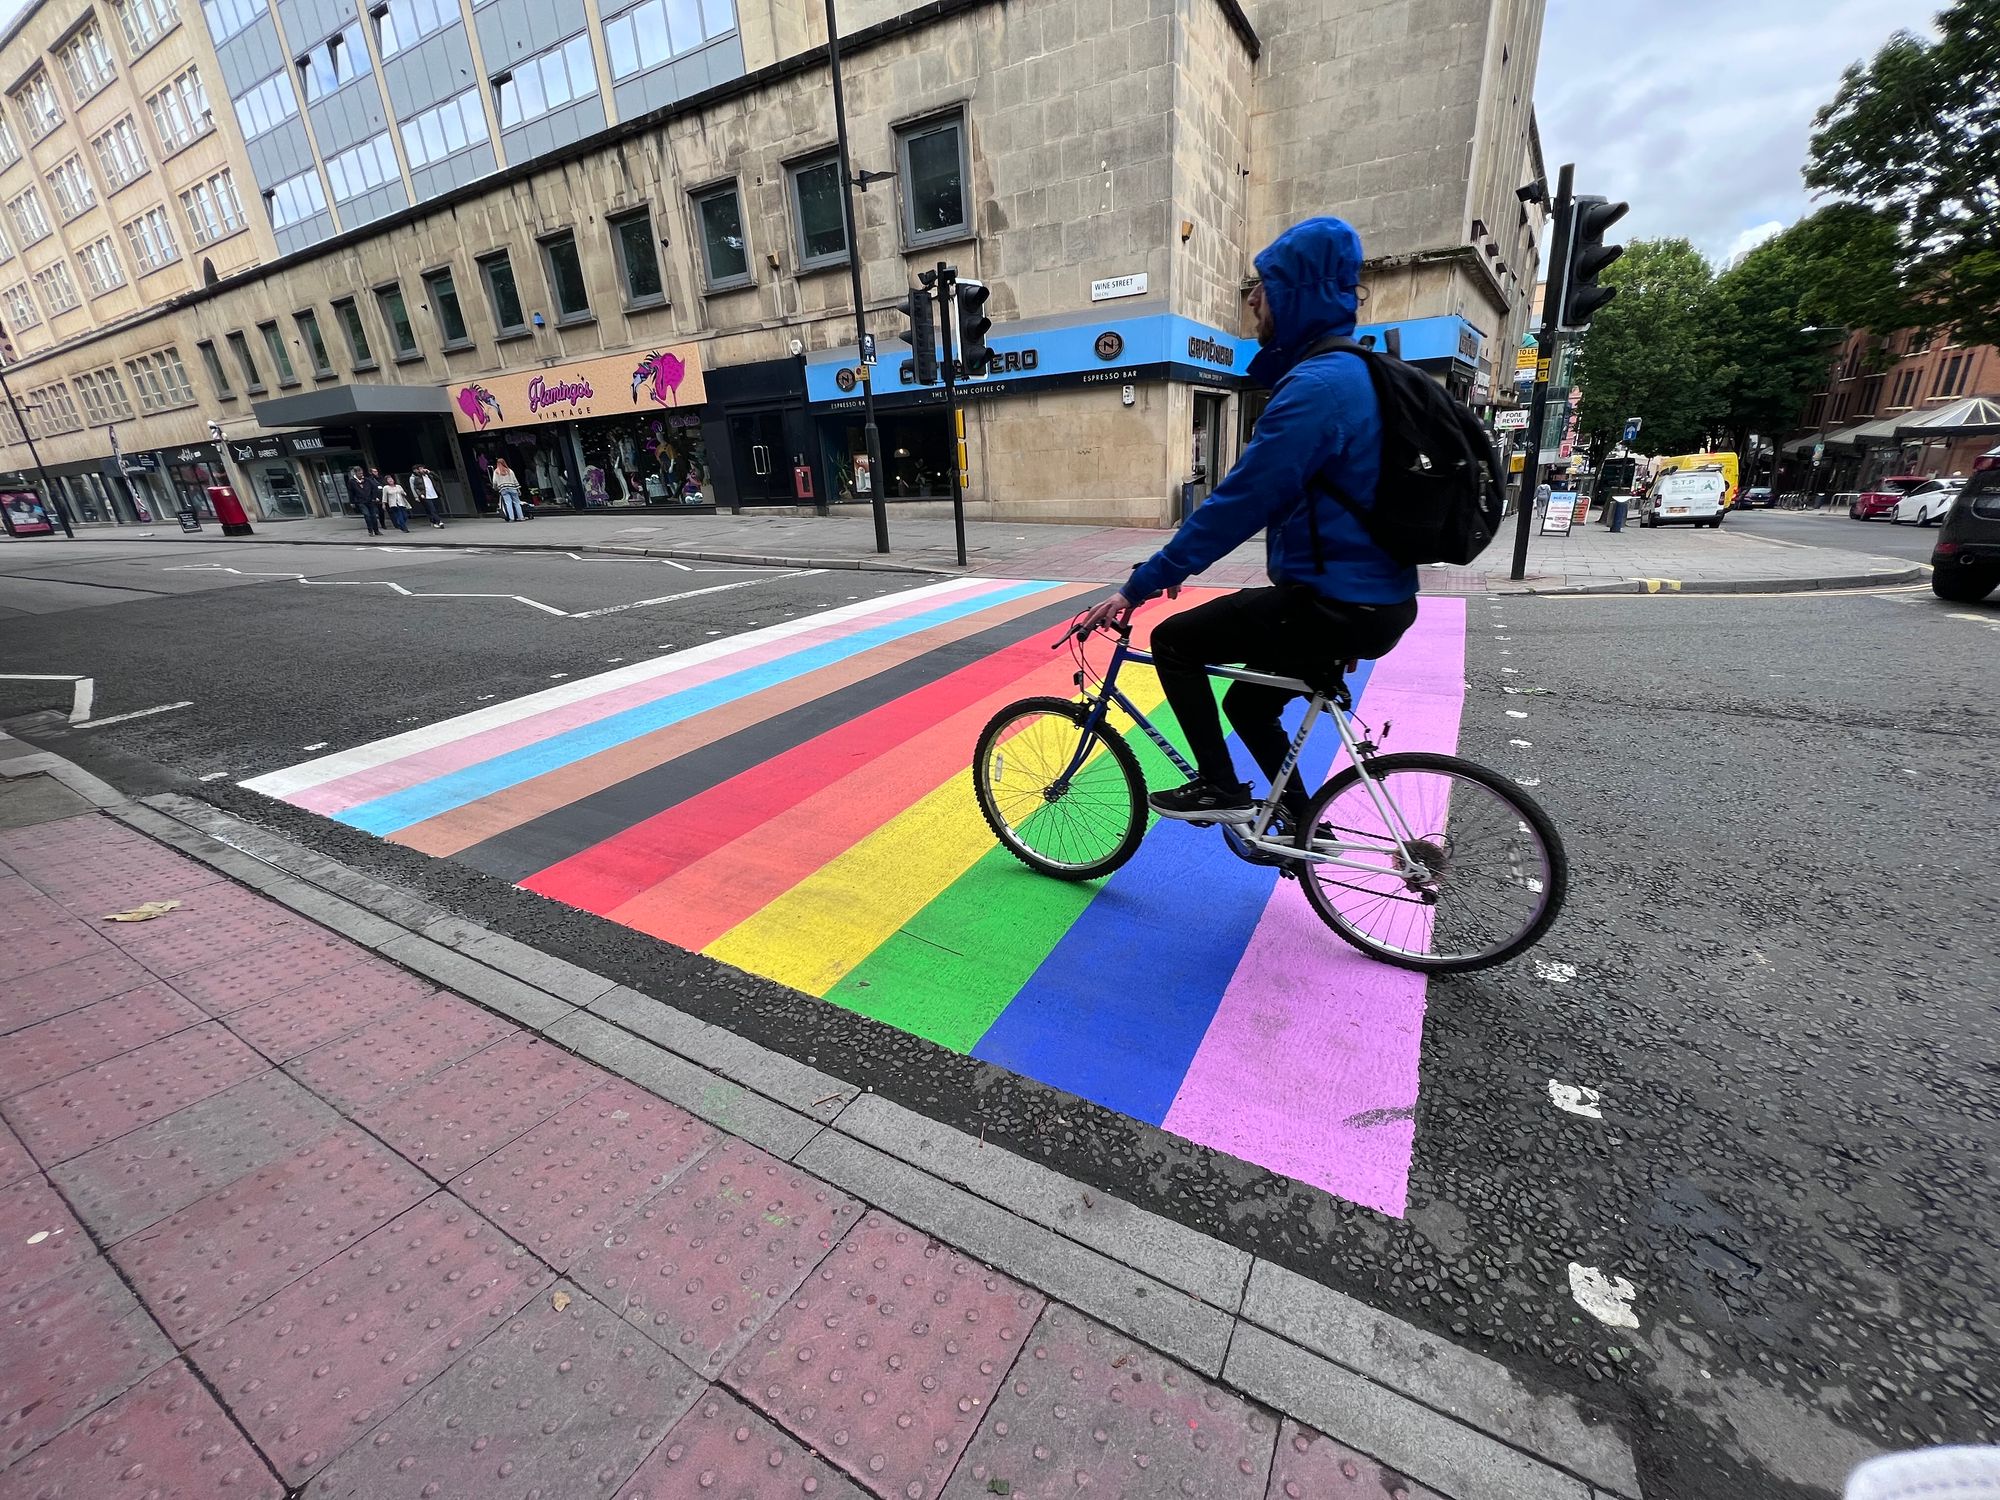 A man cycles past over a pedestrian crossing (lighted), marked out with the stripes of a trans- and race-inclusive pride flag.